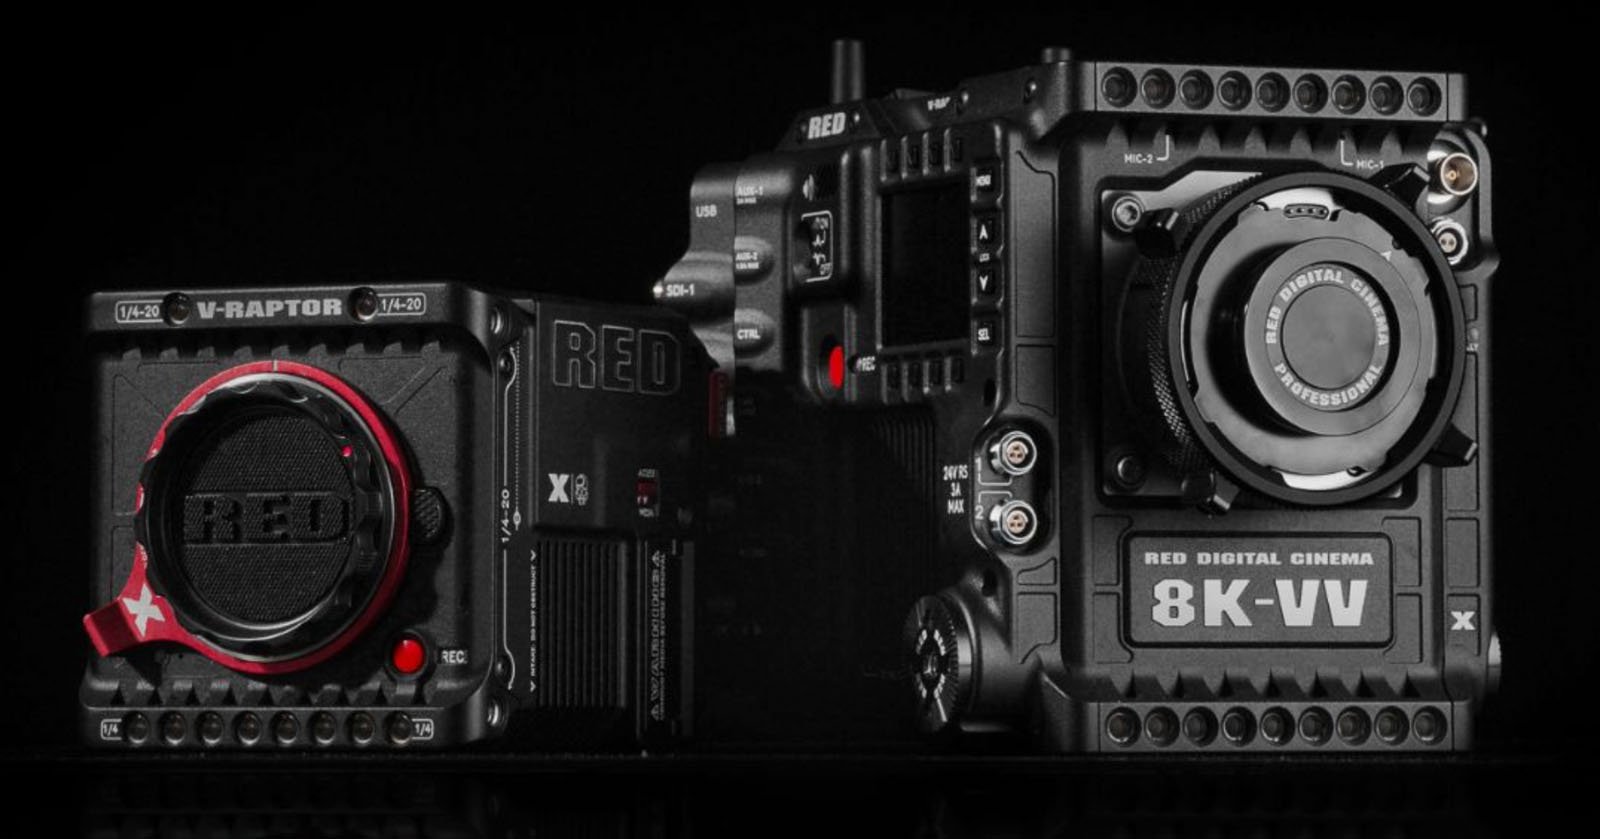  red global shutter camera promises unbelievable dynamic 